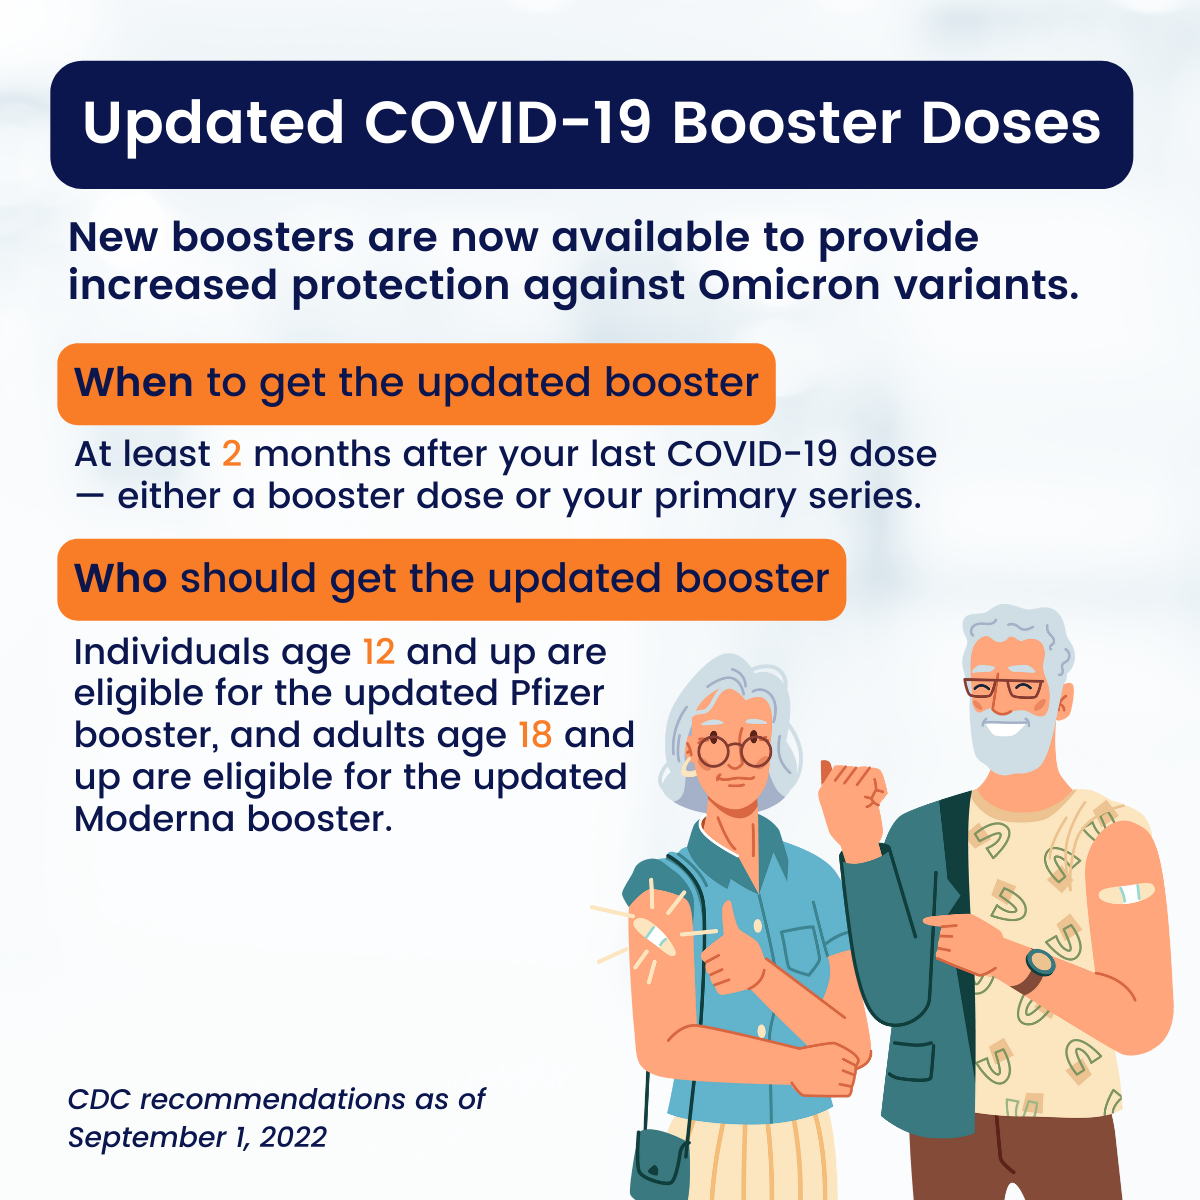 Square image with white background and navy, orange and white text communicates information about updated COVID-19 booster doses. CDC recommendations as of 09/01/2022 is in the bottom left corner. White older male and female with white and gray hair are smiling and pointing to a band aid on on their upper arm where they received their booster.